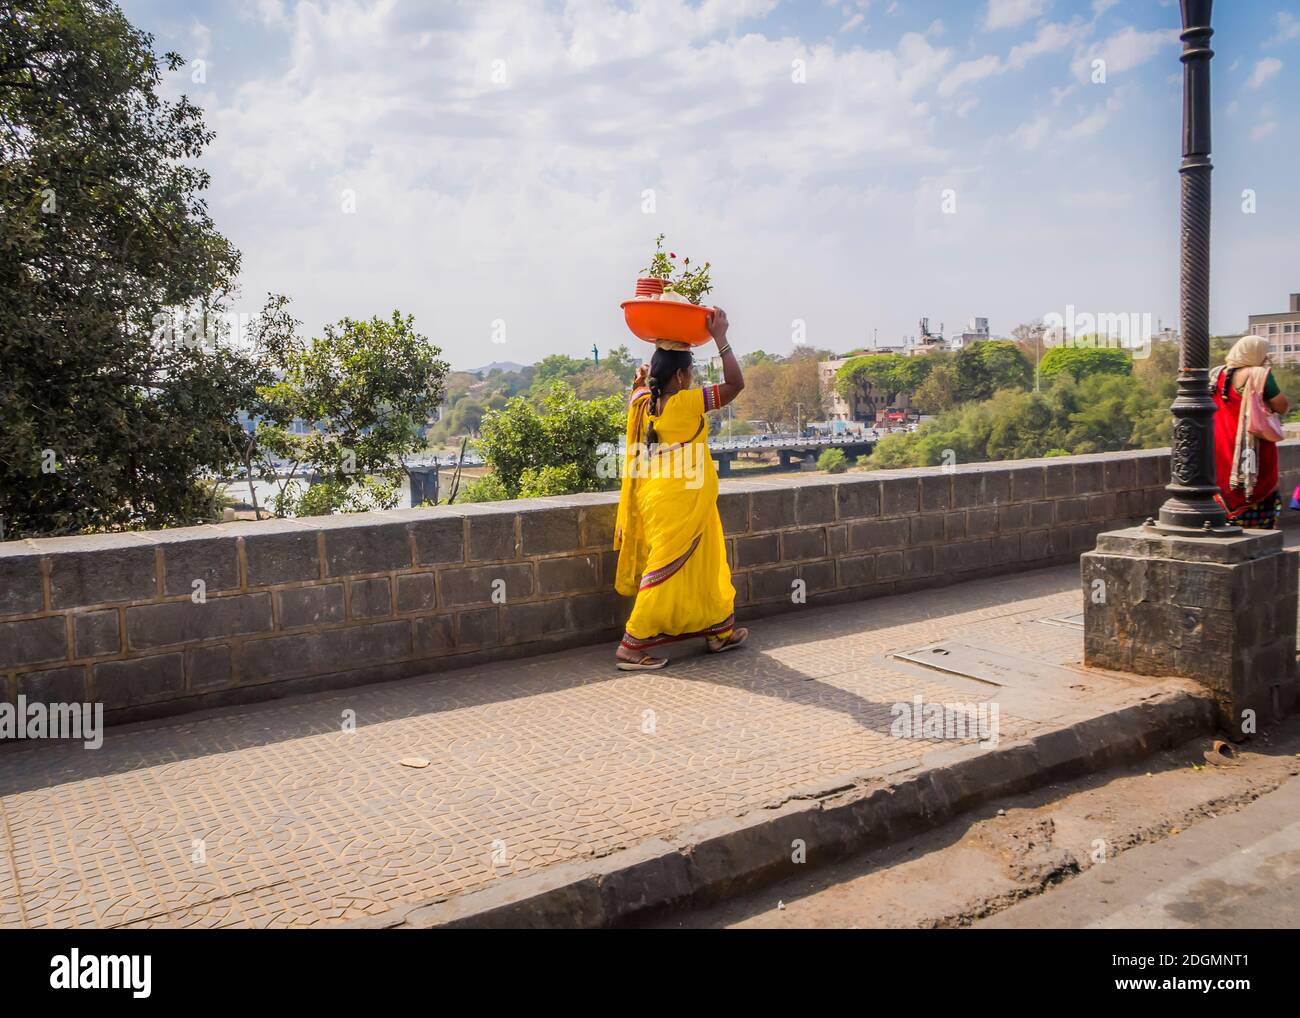 PUNE, INDIA - MARCH 14, 2019: Woman in yellow national dress saree carries on her head a basin with pots of flowers in Pune, India Stock Photo